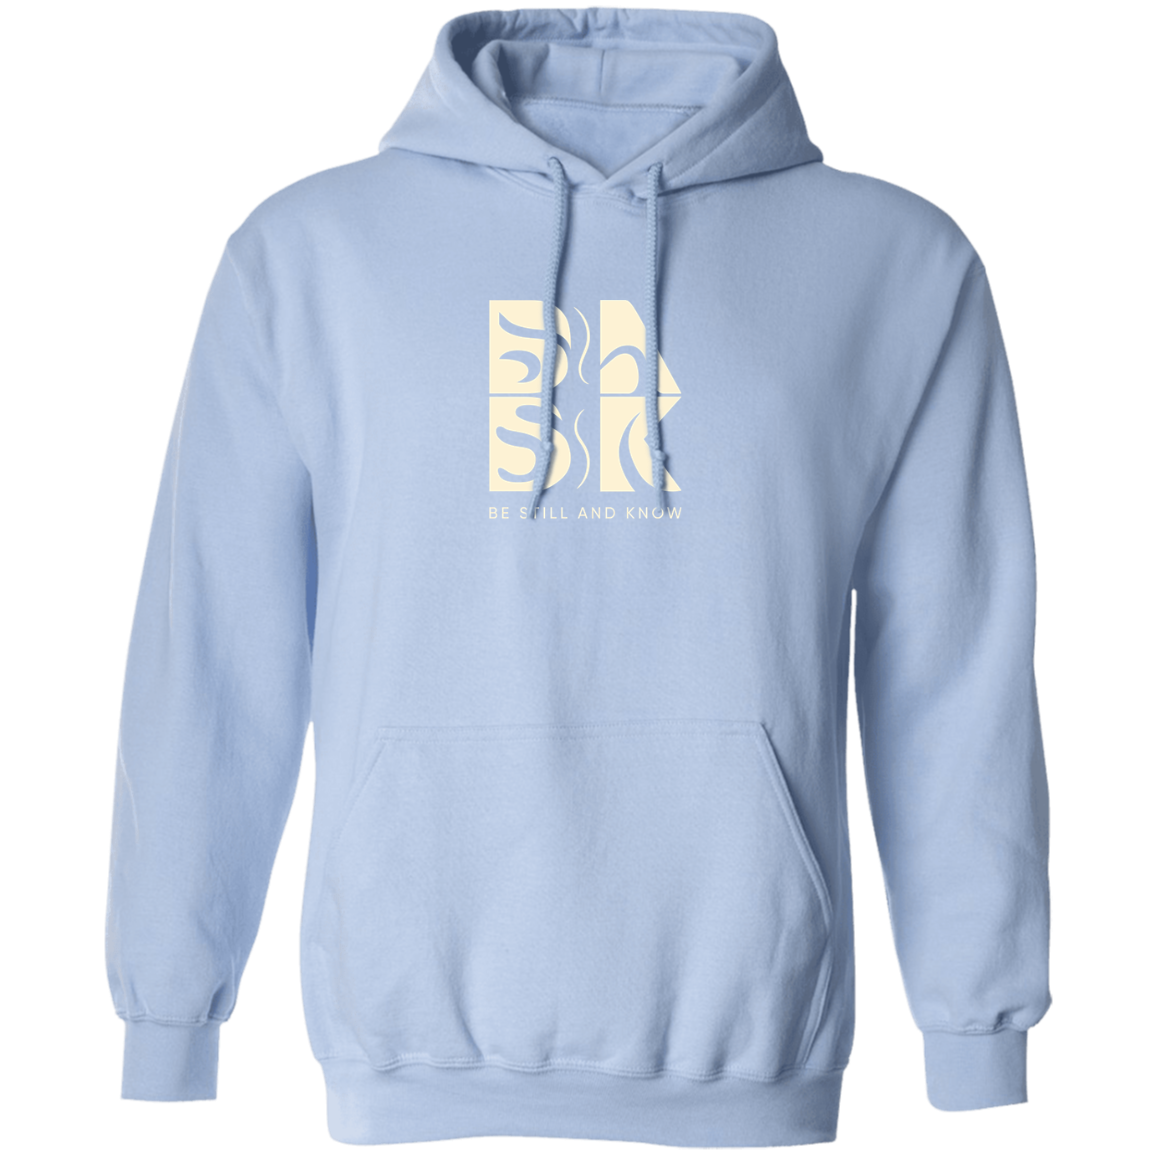 A Coastal Calm Hoodie in Light Blue with a white Be Still and Know logo on it.